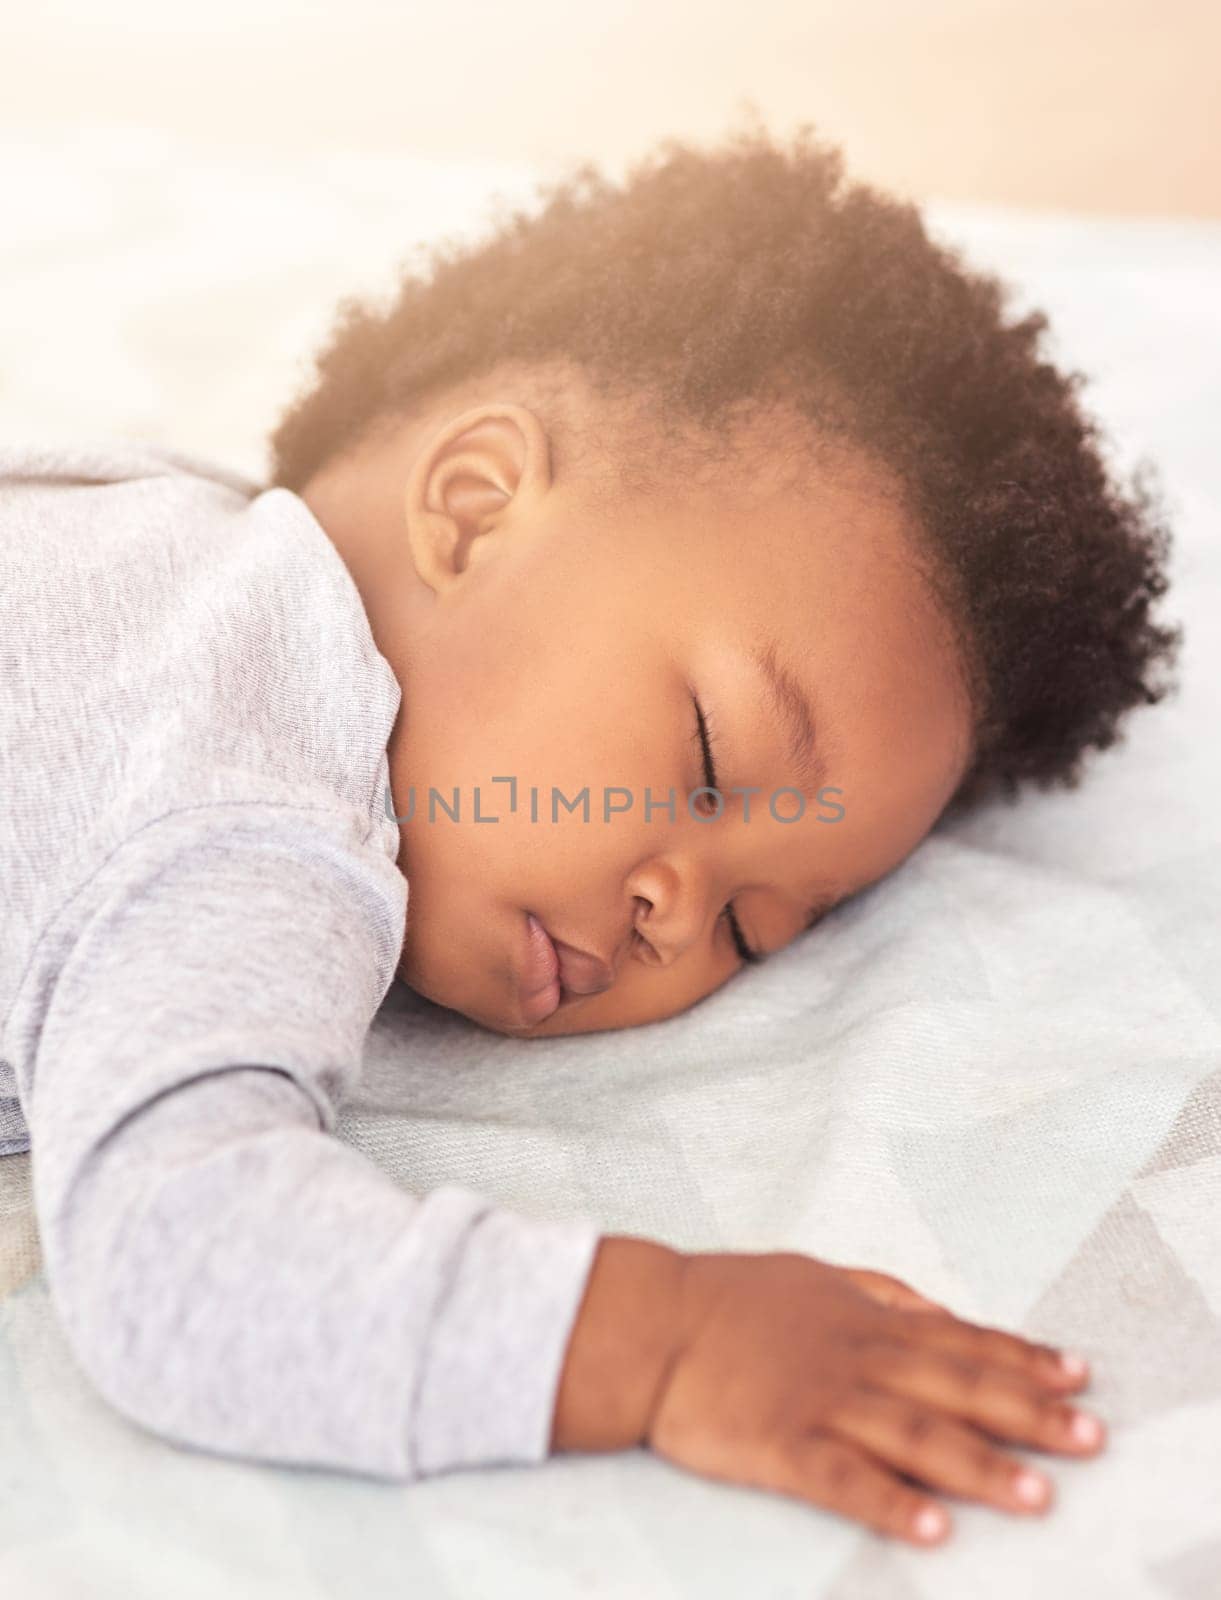 Tired, bed and baby sleeping in home on blanket for rest, nap time and dreaming in nursery. Childcare, newborn and cute, adorable and African child in bedroom sleep for comfort, relaxing and calm by YuriArcurs